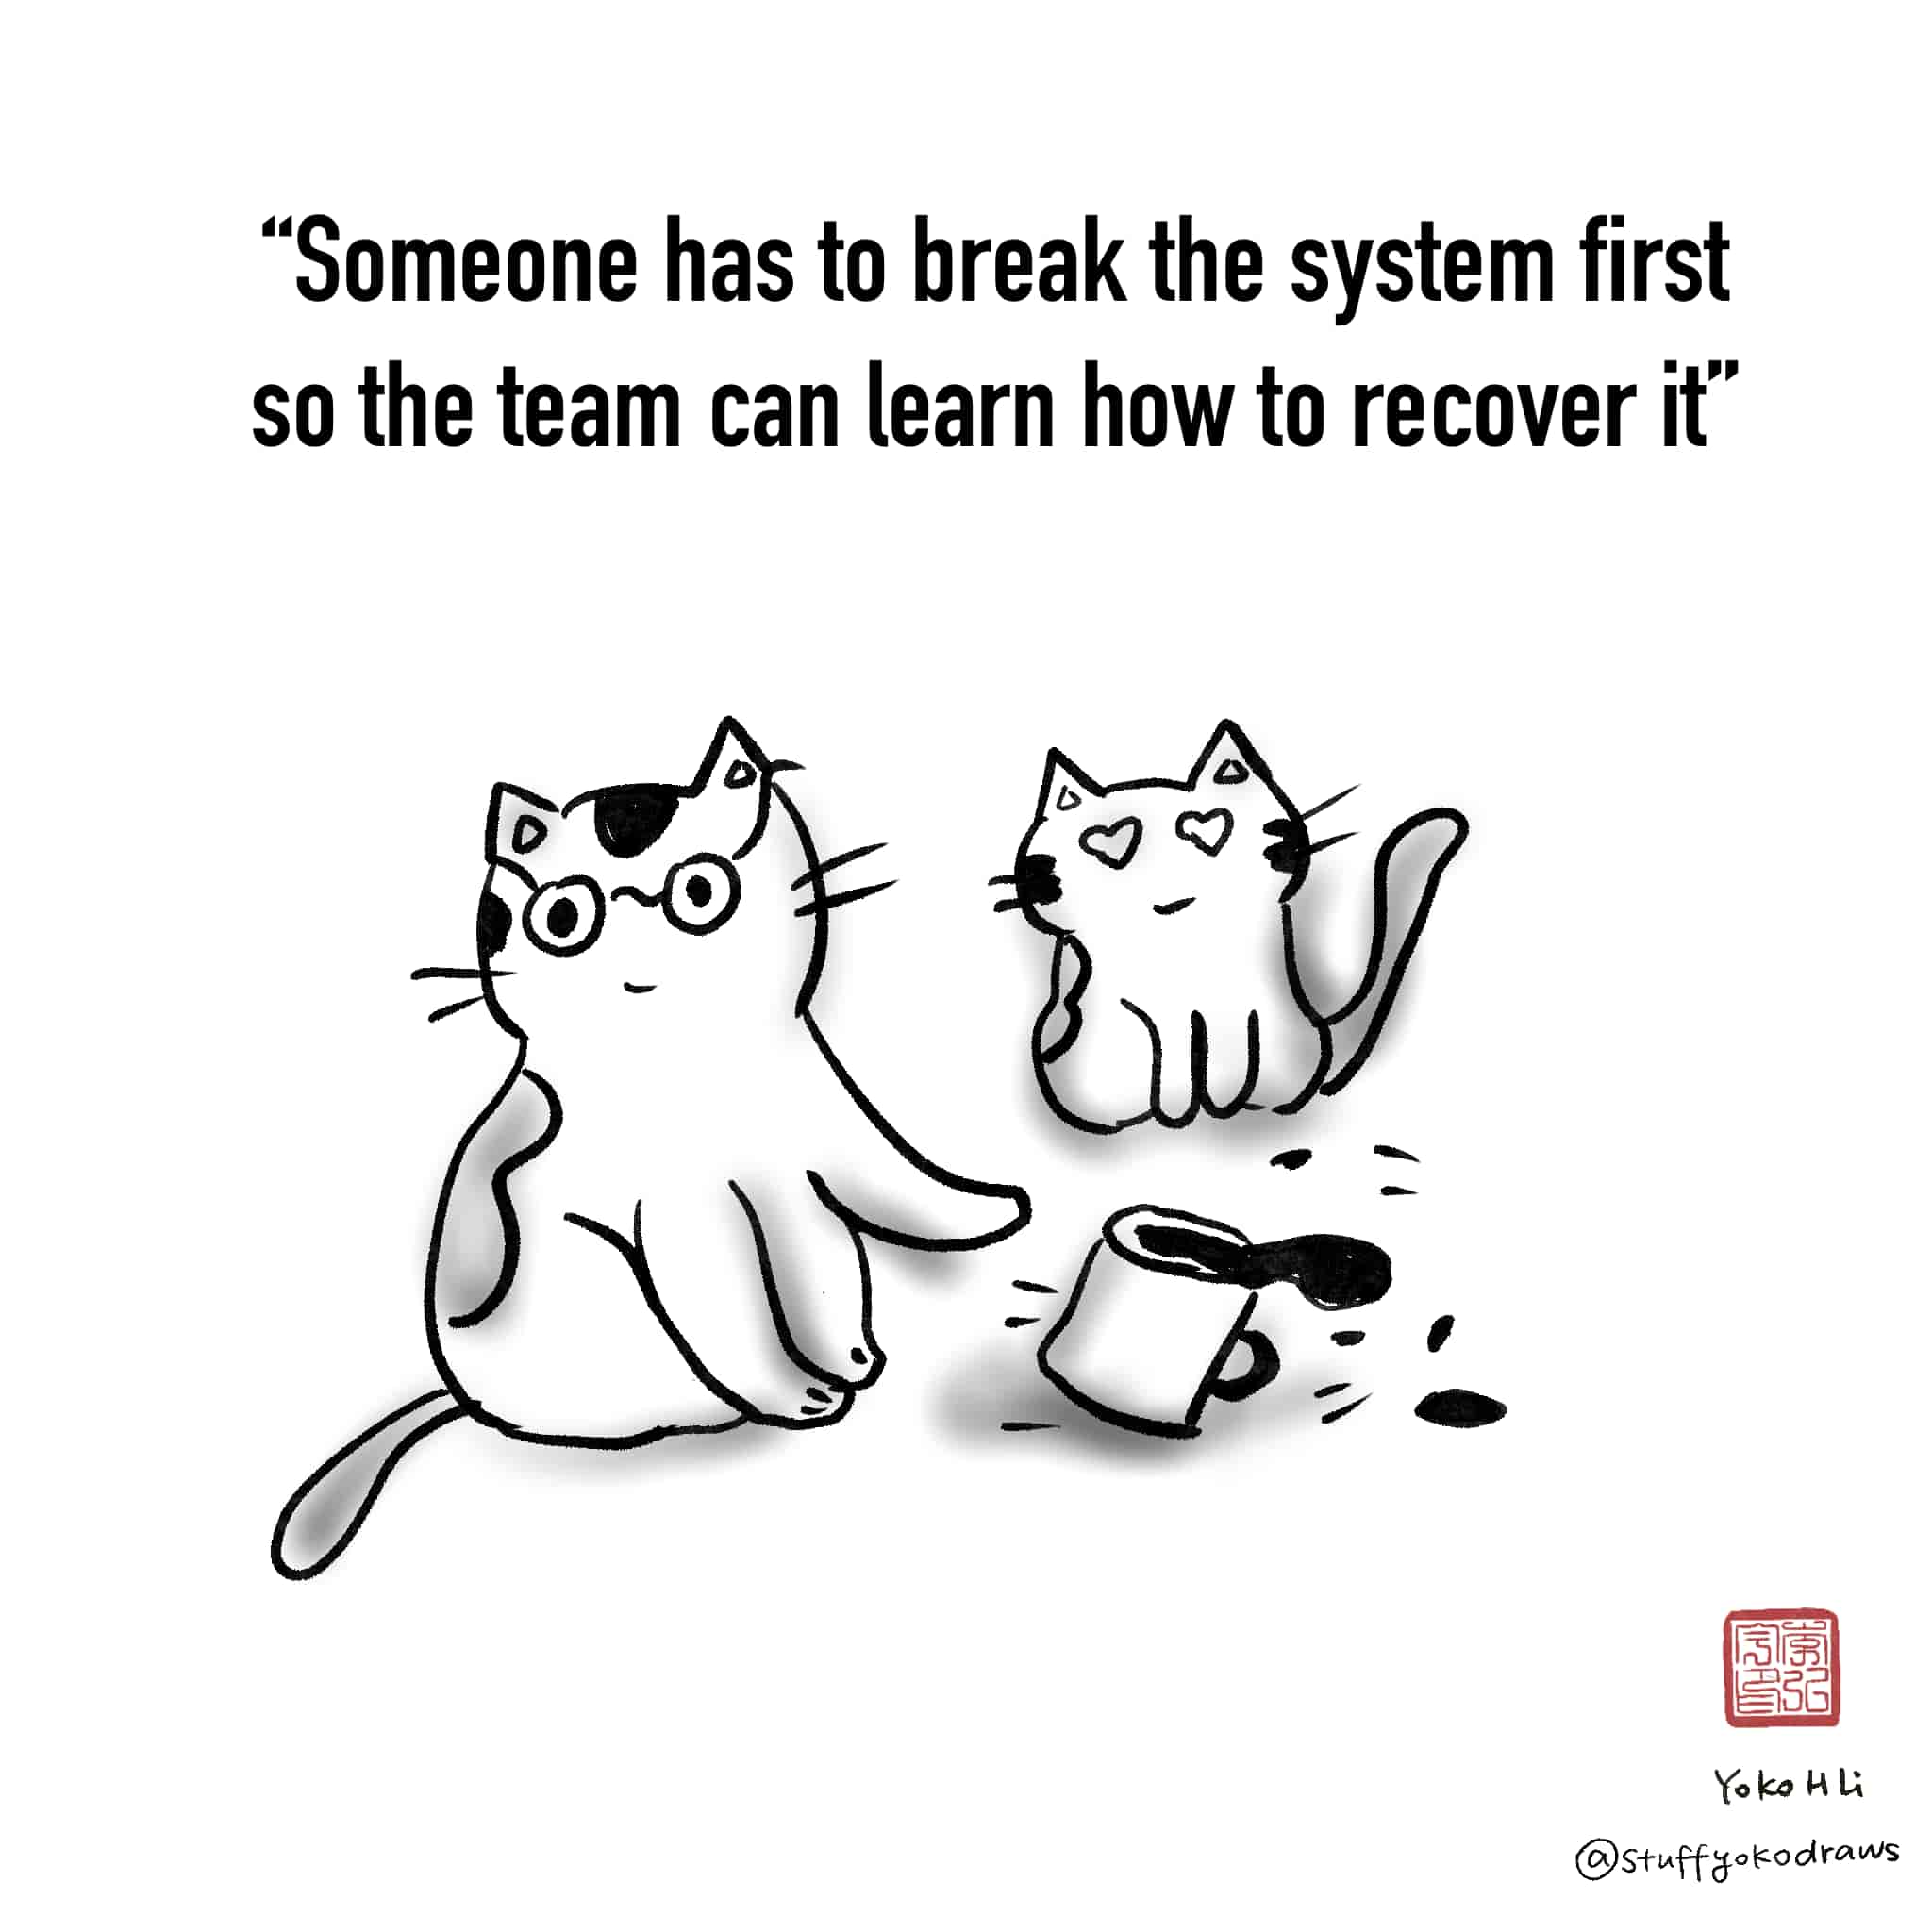 Comic says: Someone has to break the system first so the team can learn how to recover it. Image: Cat tipping over coffee with another looking on.